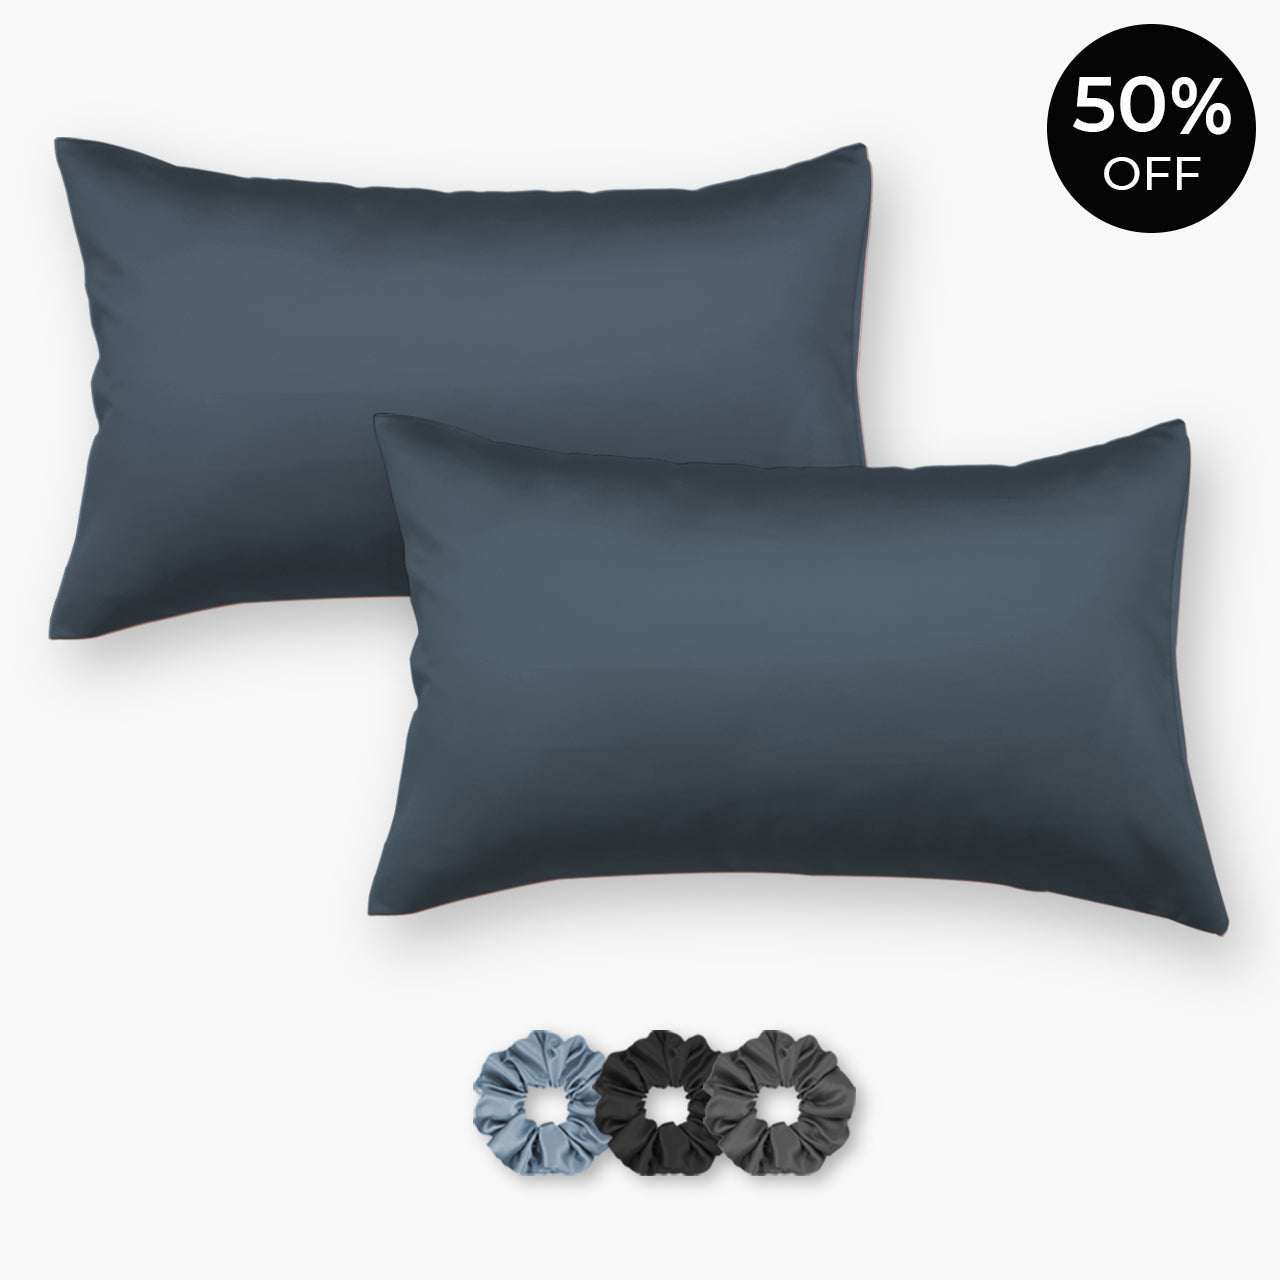 Dark Blue Satin Pillowcases - Set of 2 (With 3 Free Scrunchies)